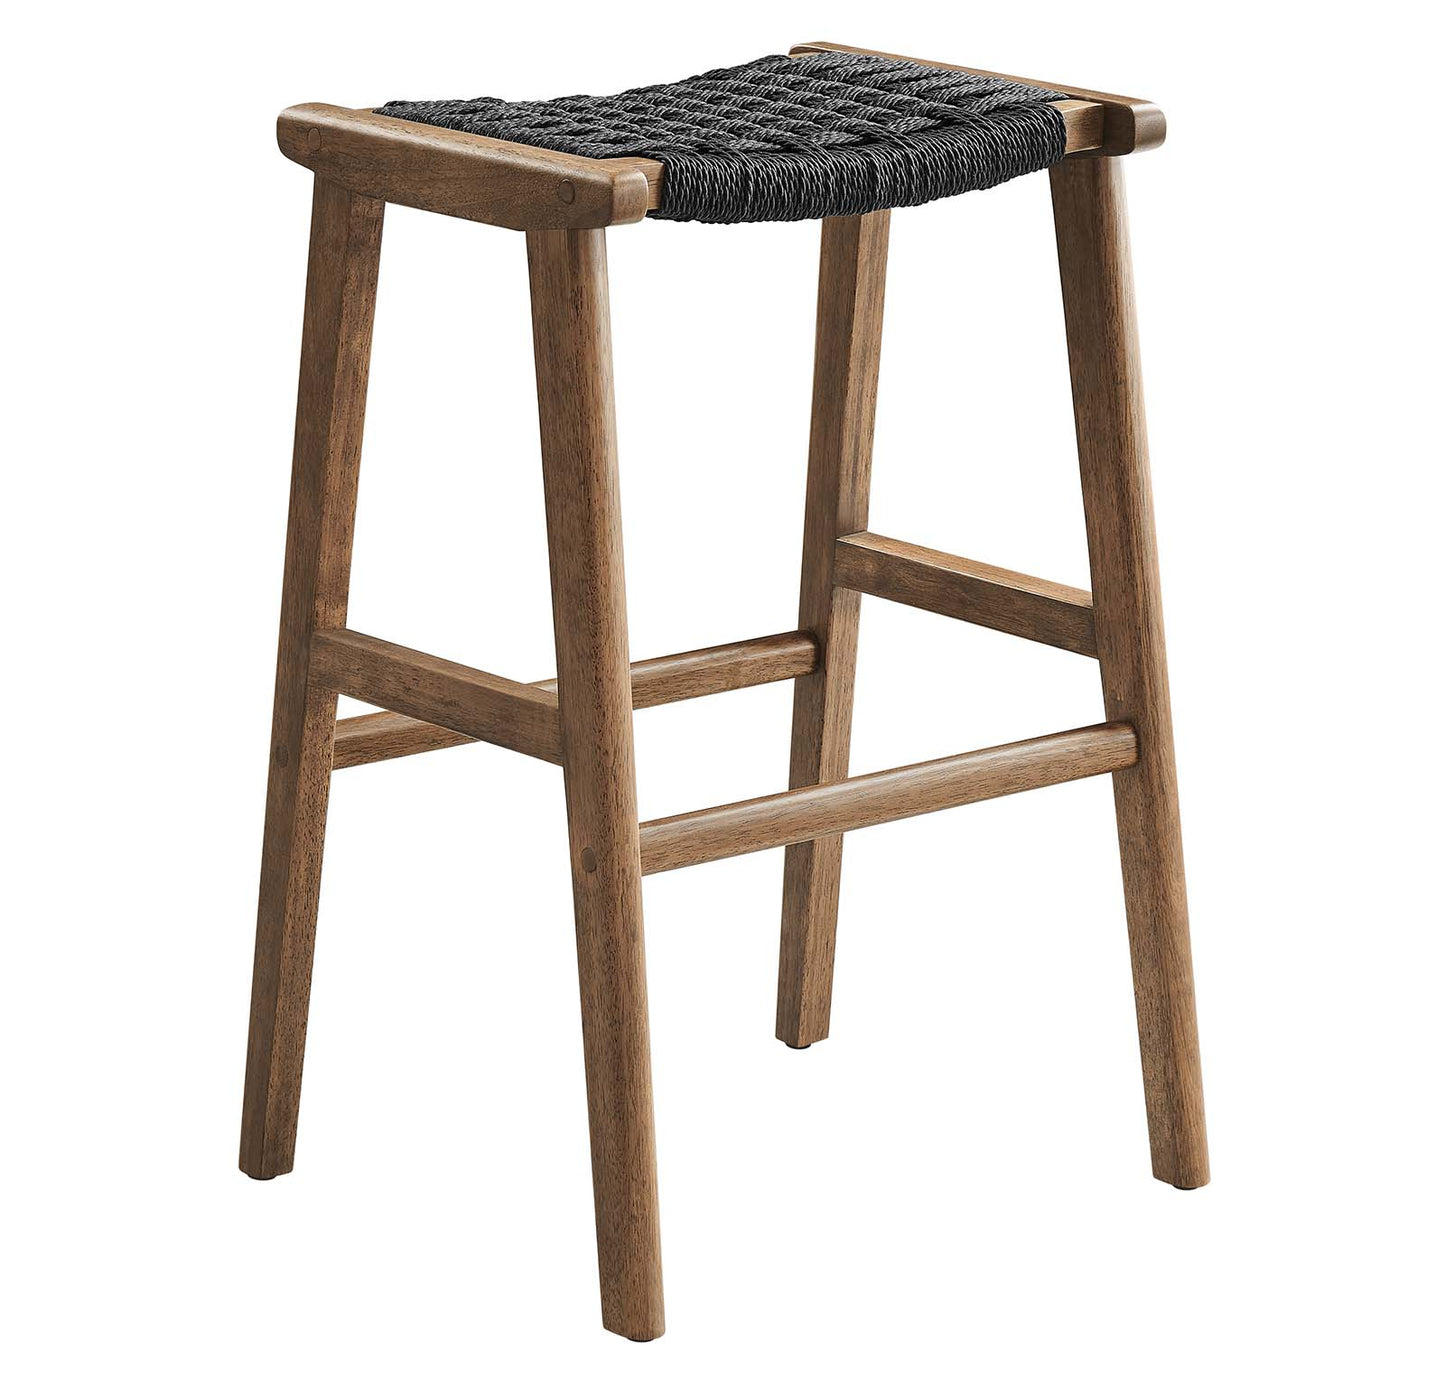 Saoirse Woven Rope Wood Bar Stool - Set of 2 By Modway - EEI-6550 | Bar Stools | Modway - 21